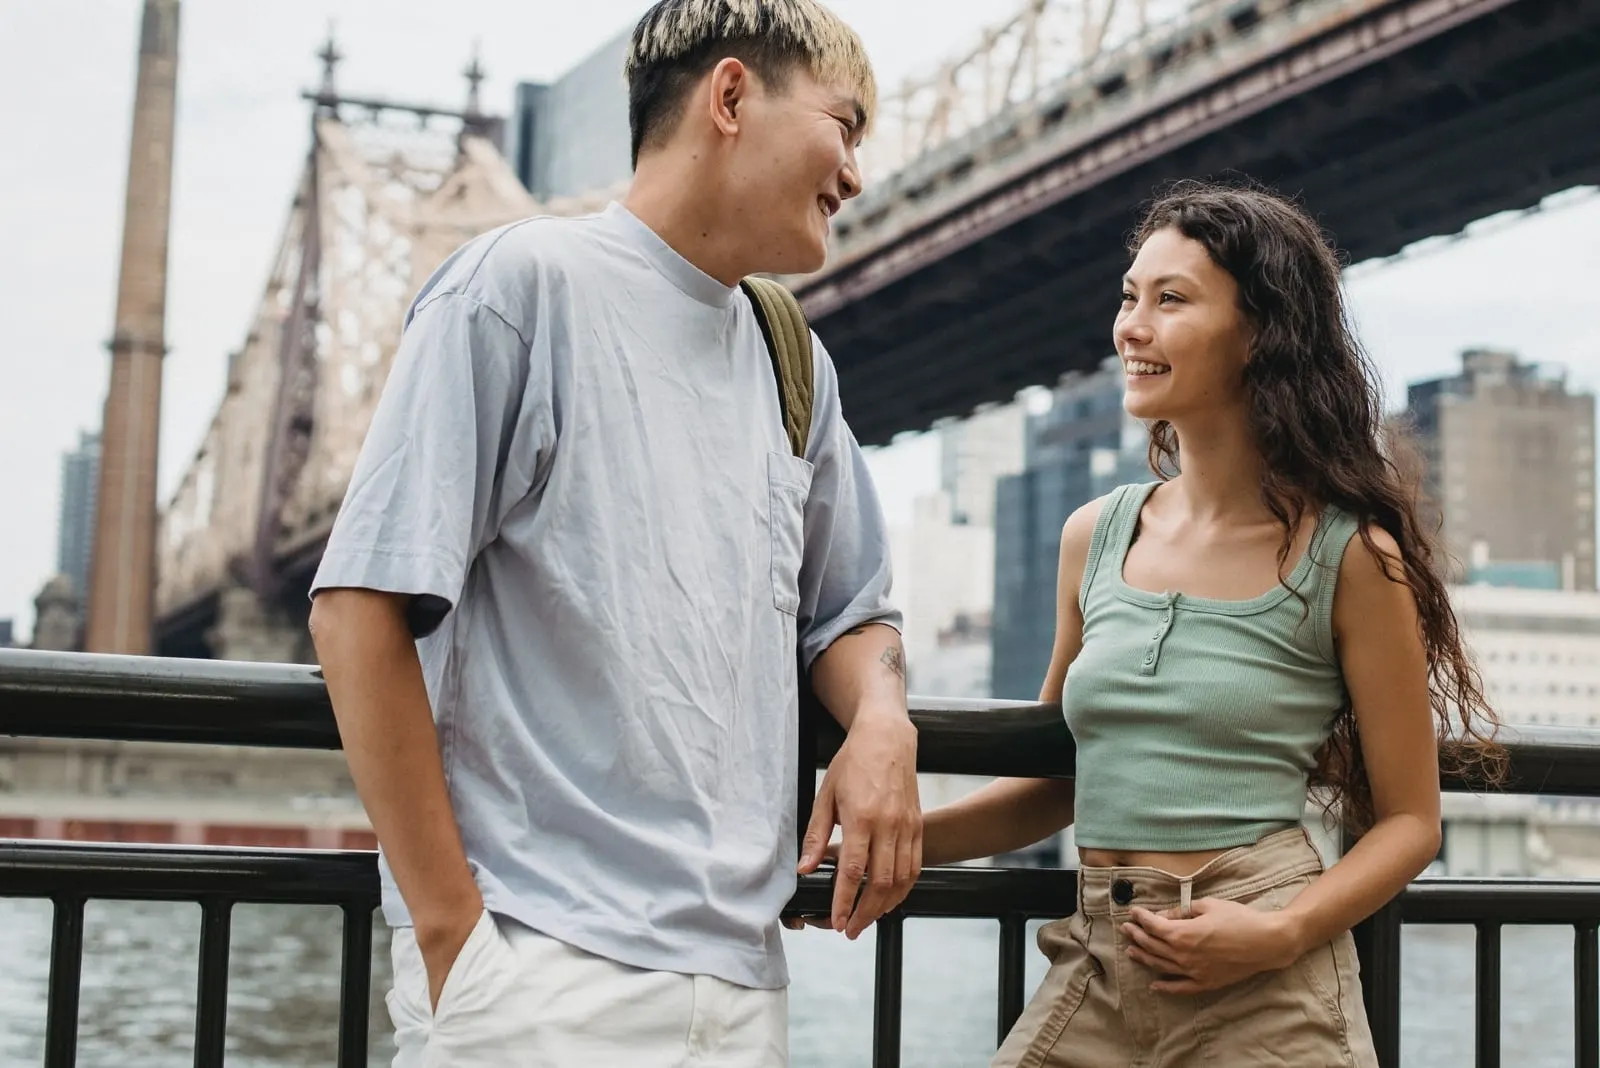 man and woman smiling while standing near bridge